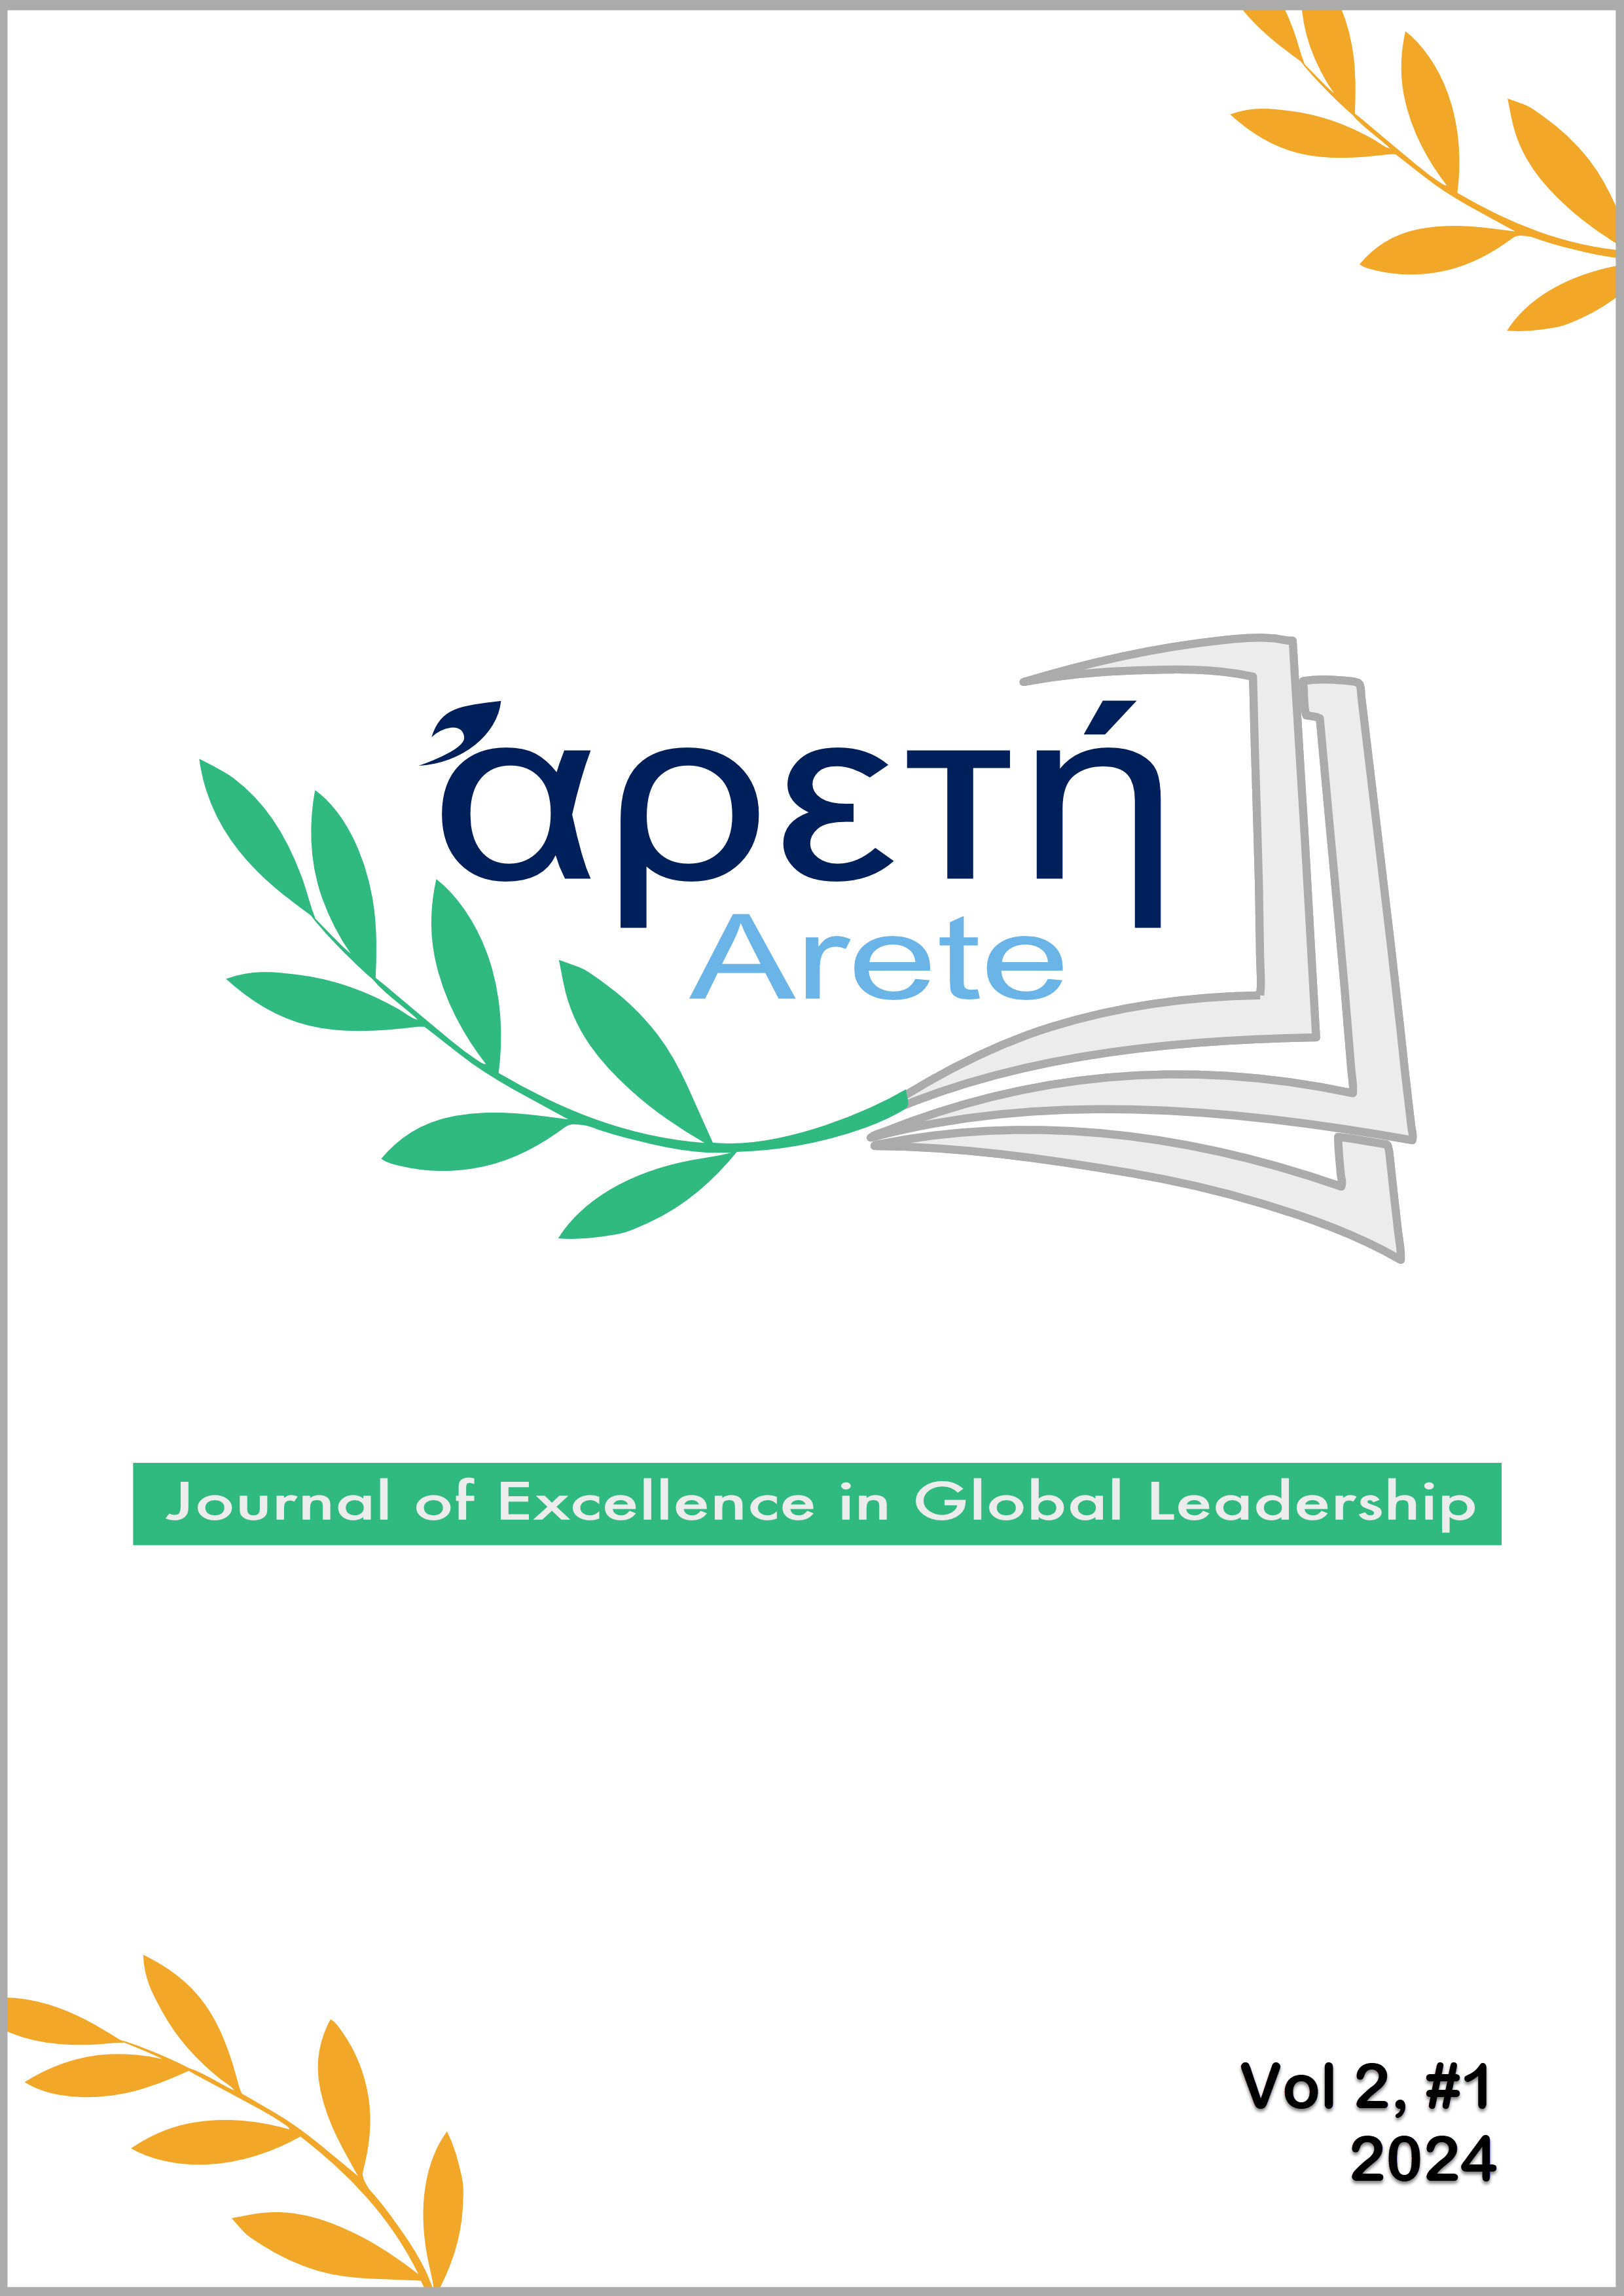 					View Vol. 2 No. 1 (2024): Αρετή (Arete) Journal of Excellence in Global Leadership
				